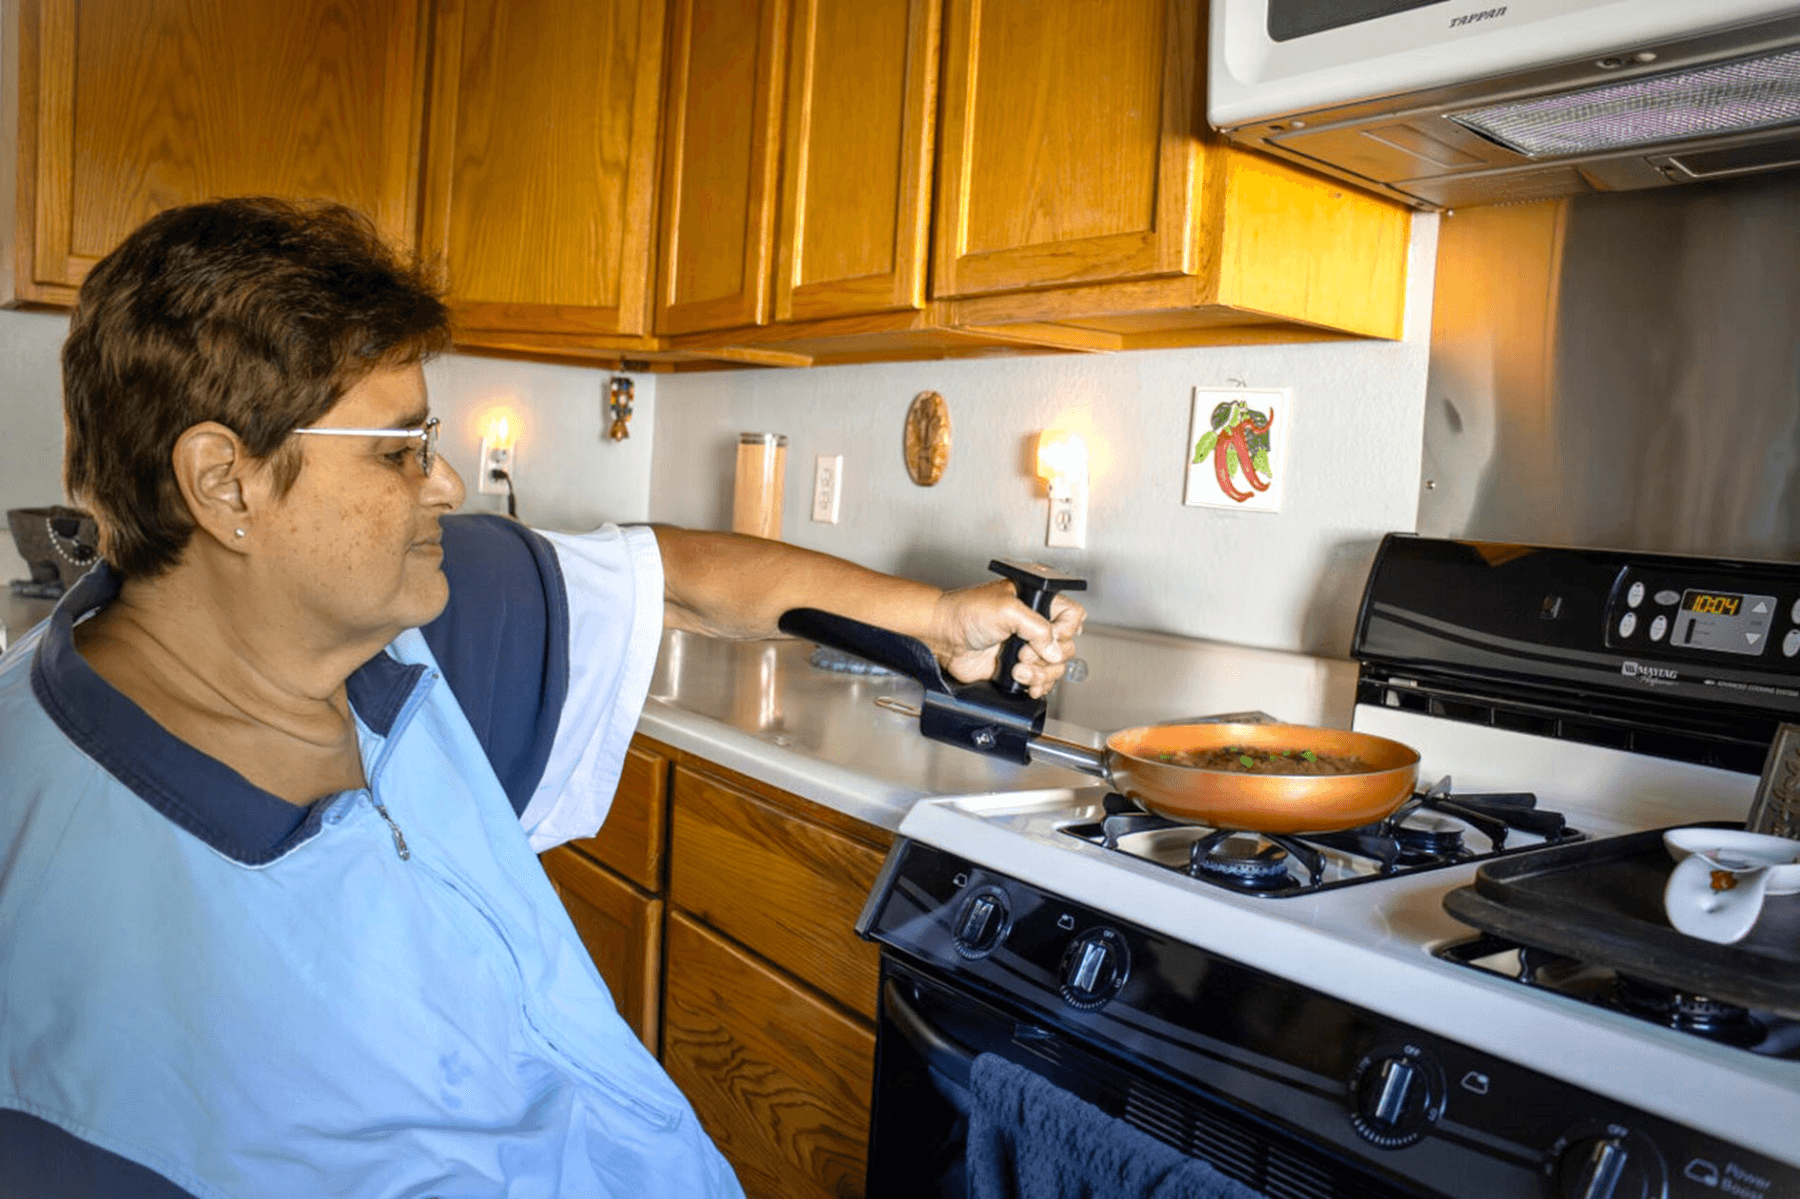 Felica using the Adaptive Pan handle while cooking